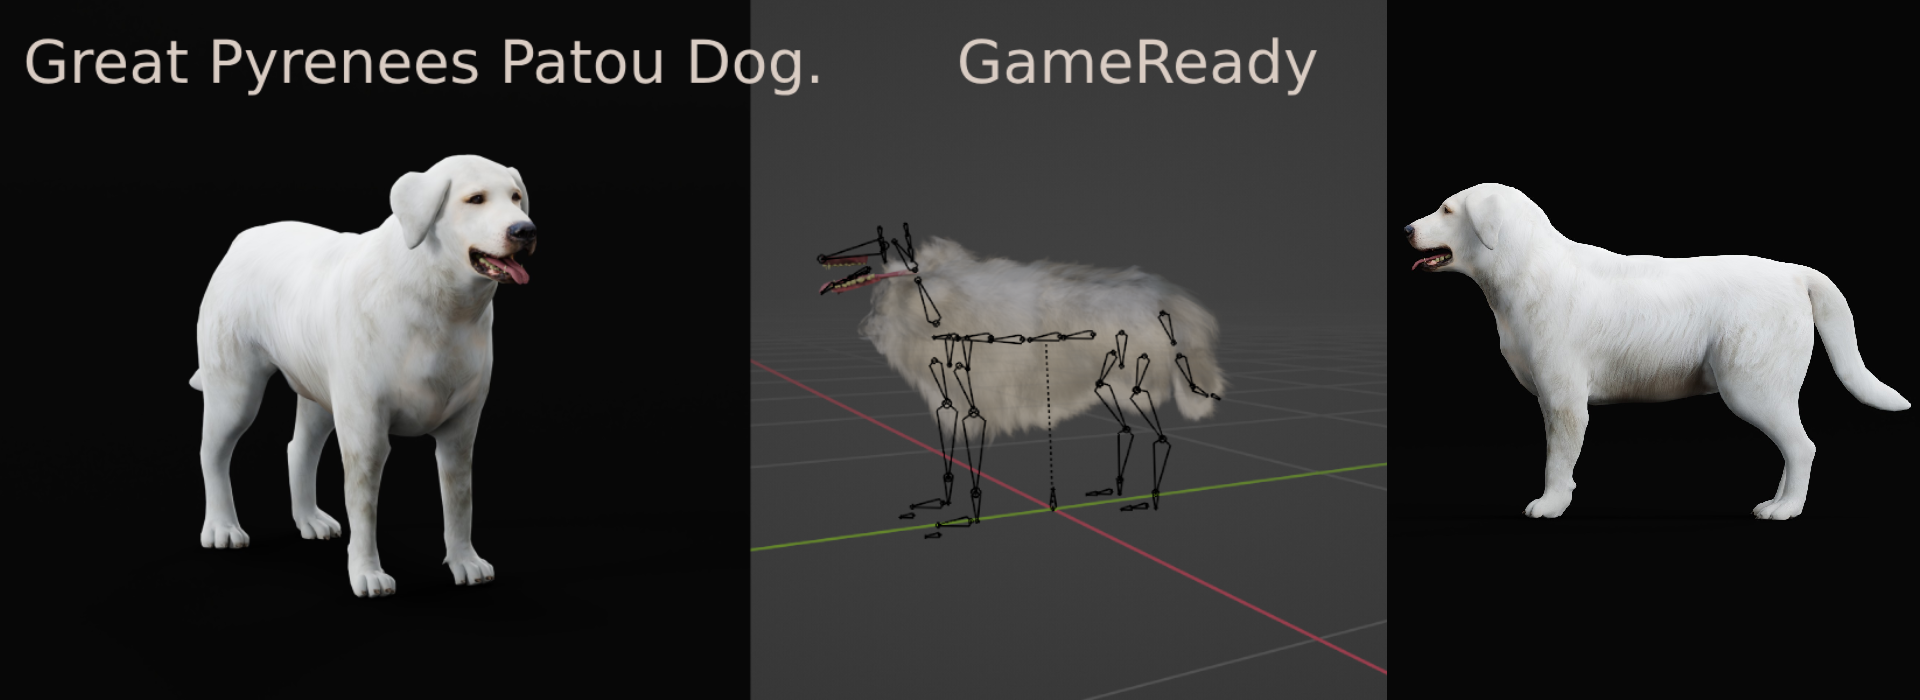 Great Pyrenees Patou Dog - FlippedNormals